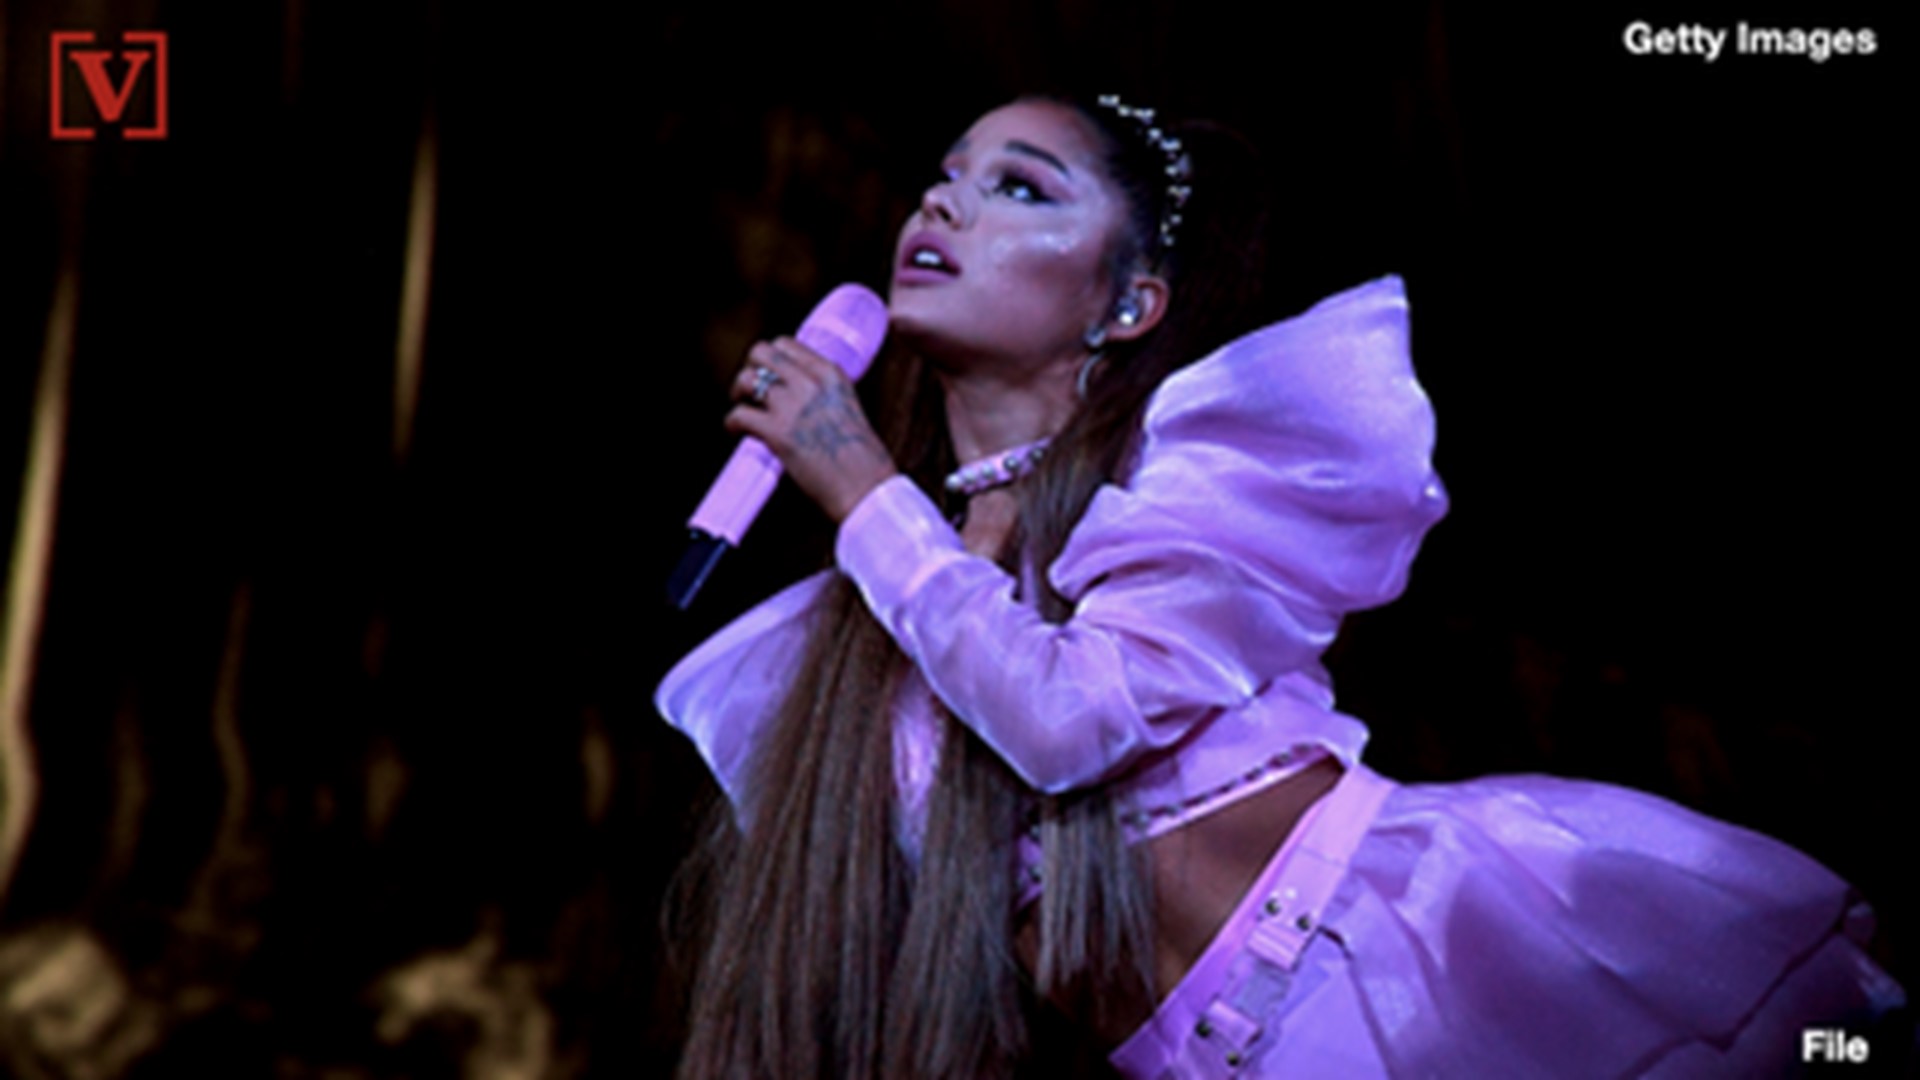 Ariana Grande releases a letter on twitter after video reportedly surfaces of her appearing to be crying during one of her concerts. Veuer's Mercer Morrison has the story.